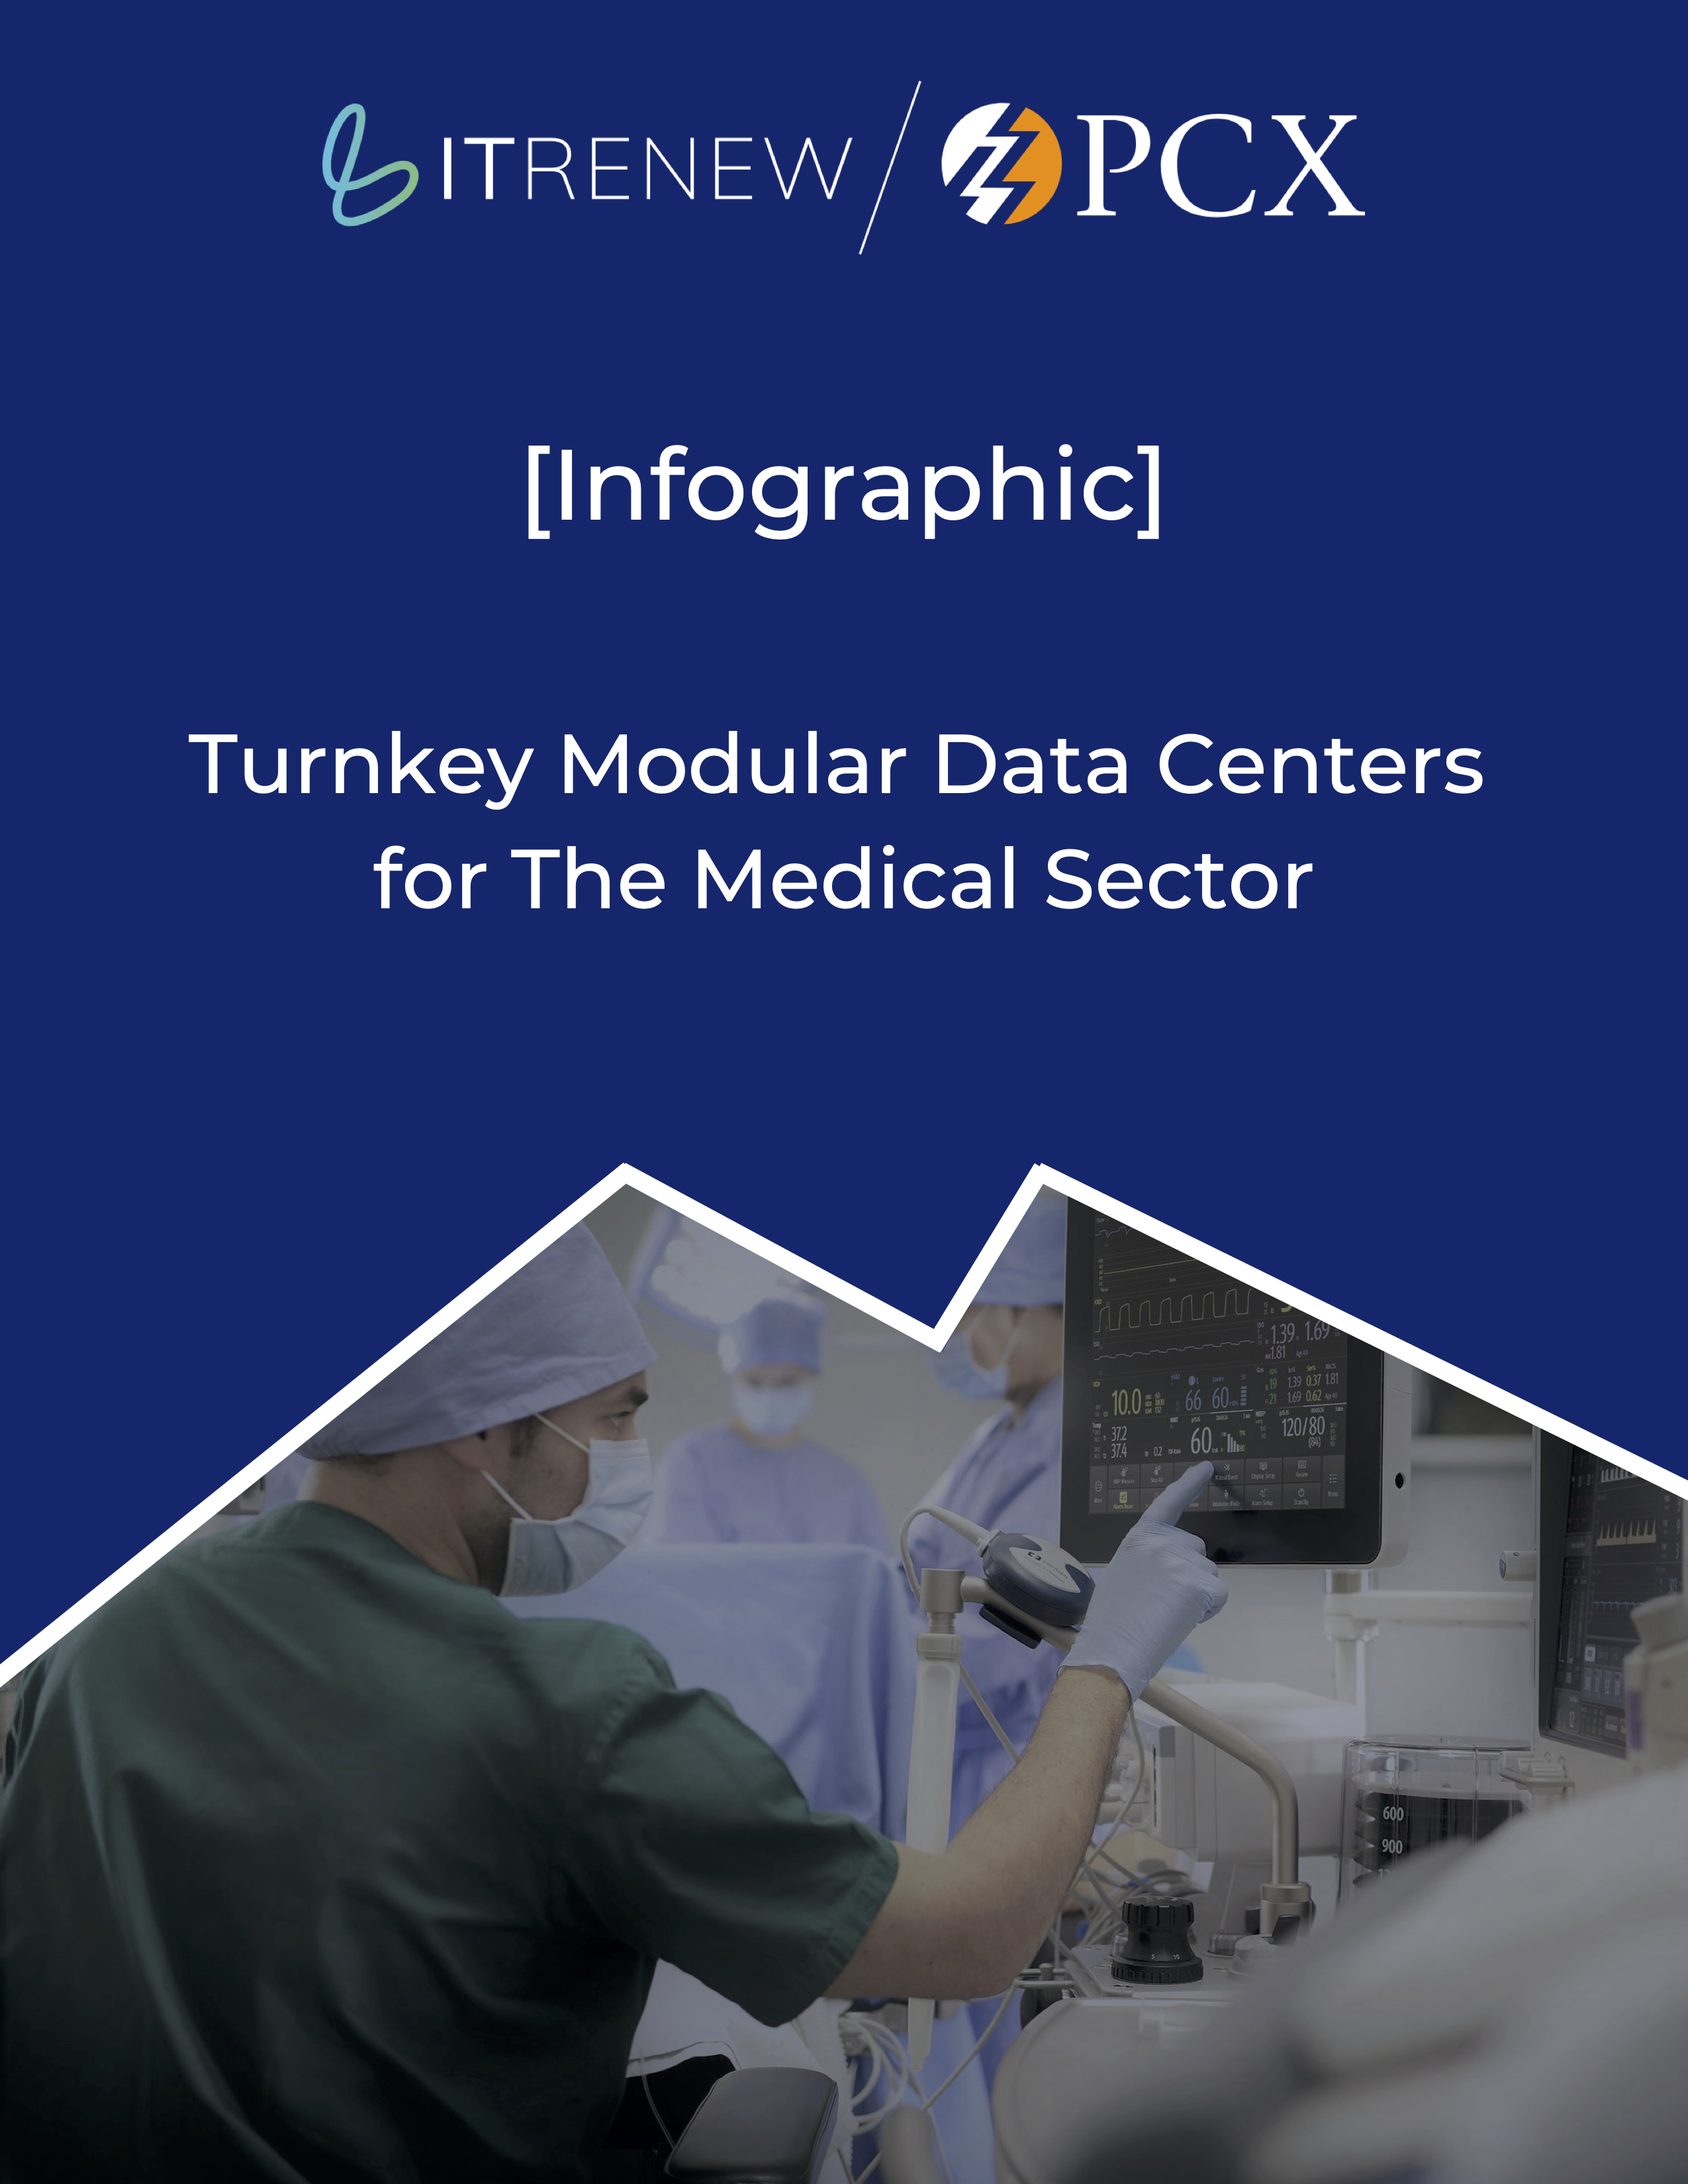 Turnkey Modular Data Centers for the Medical Sector